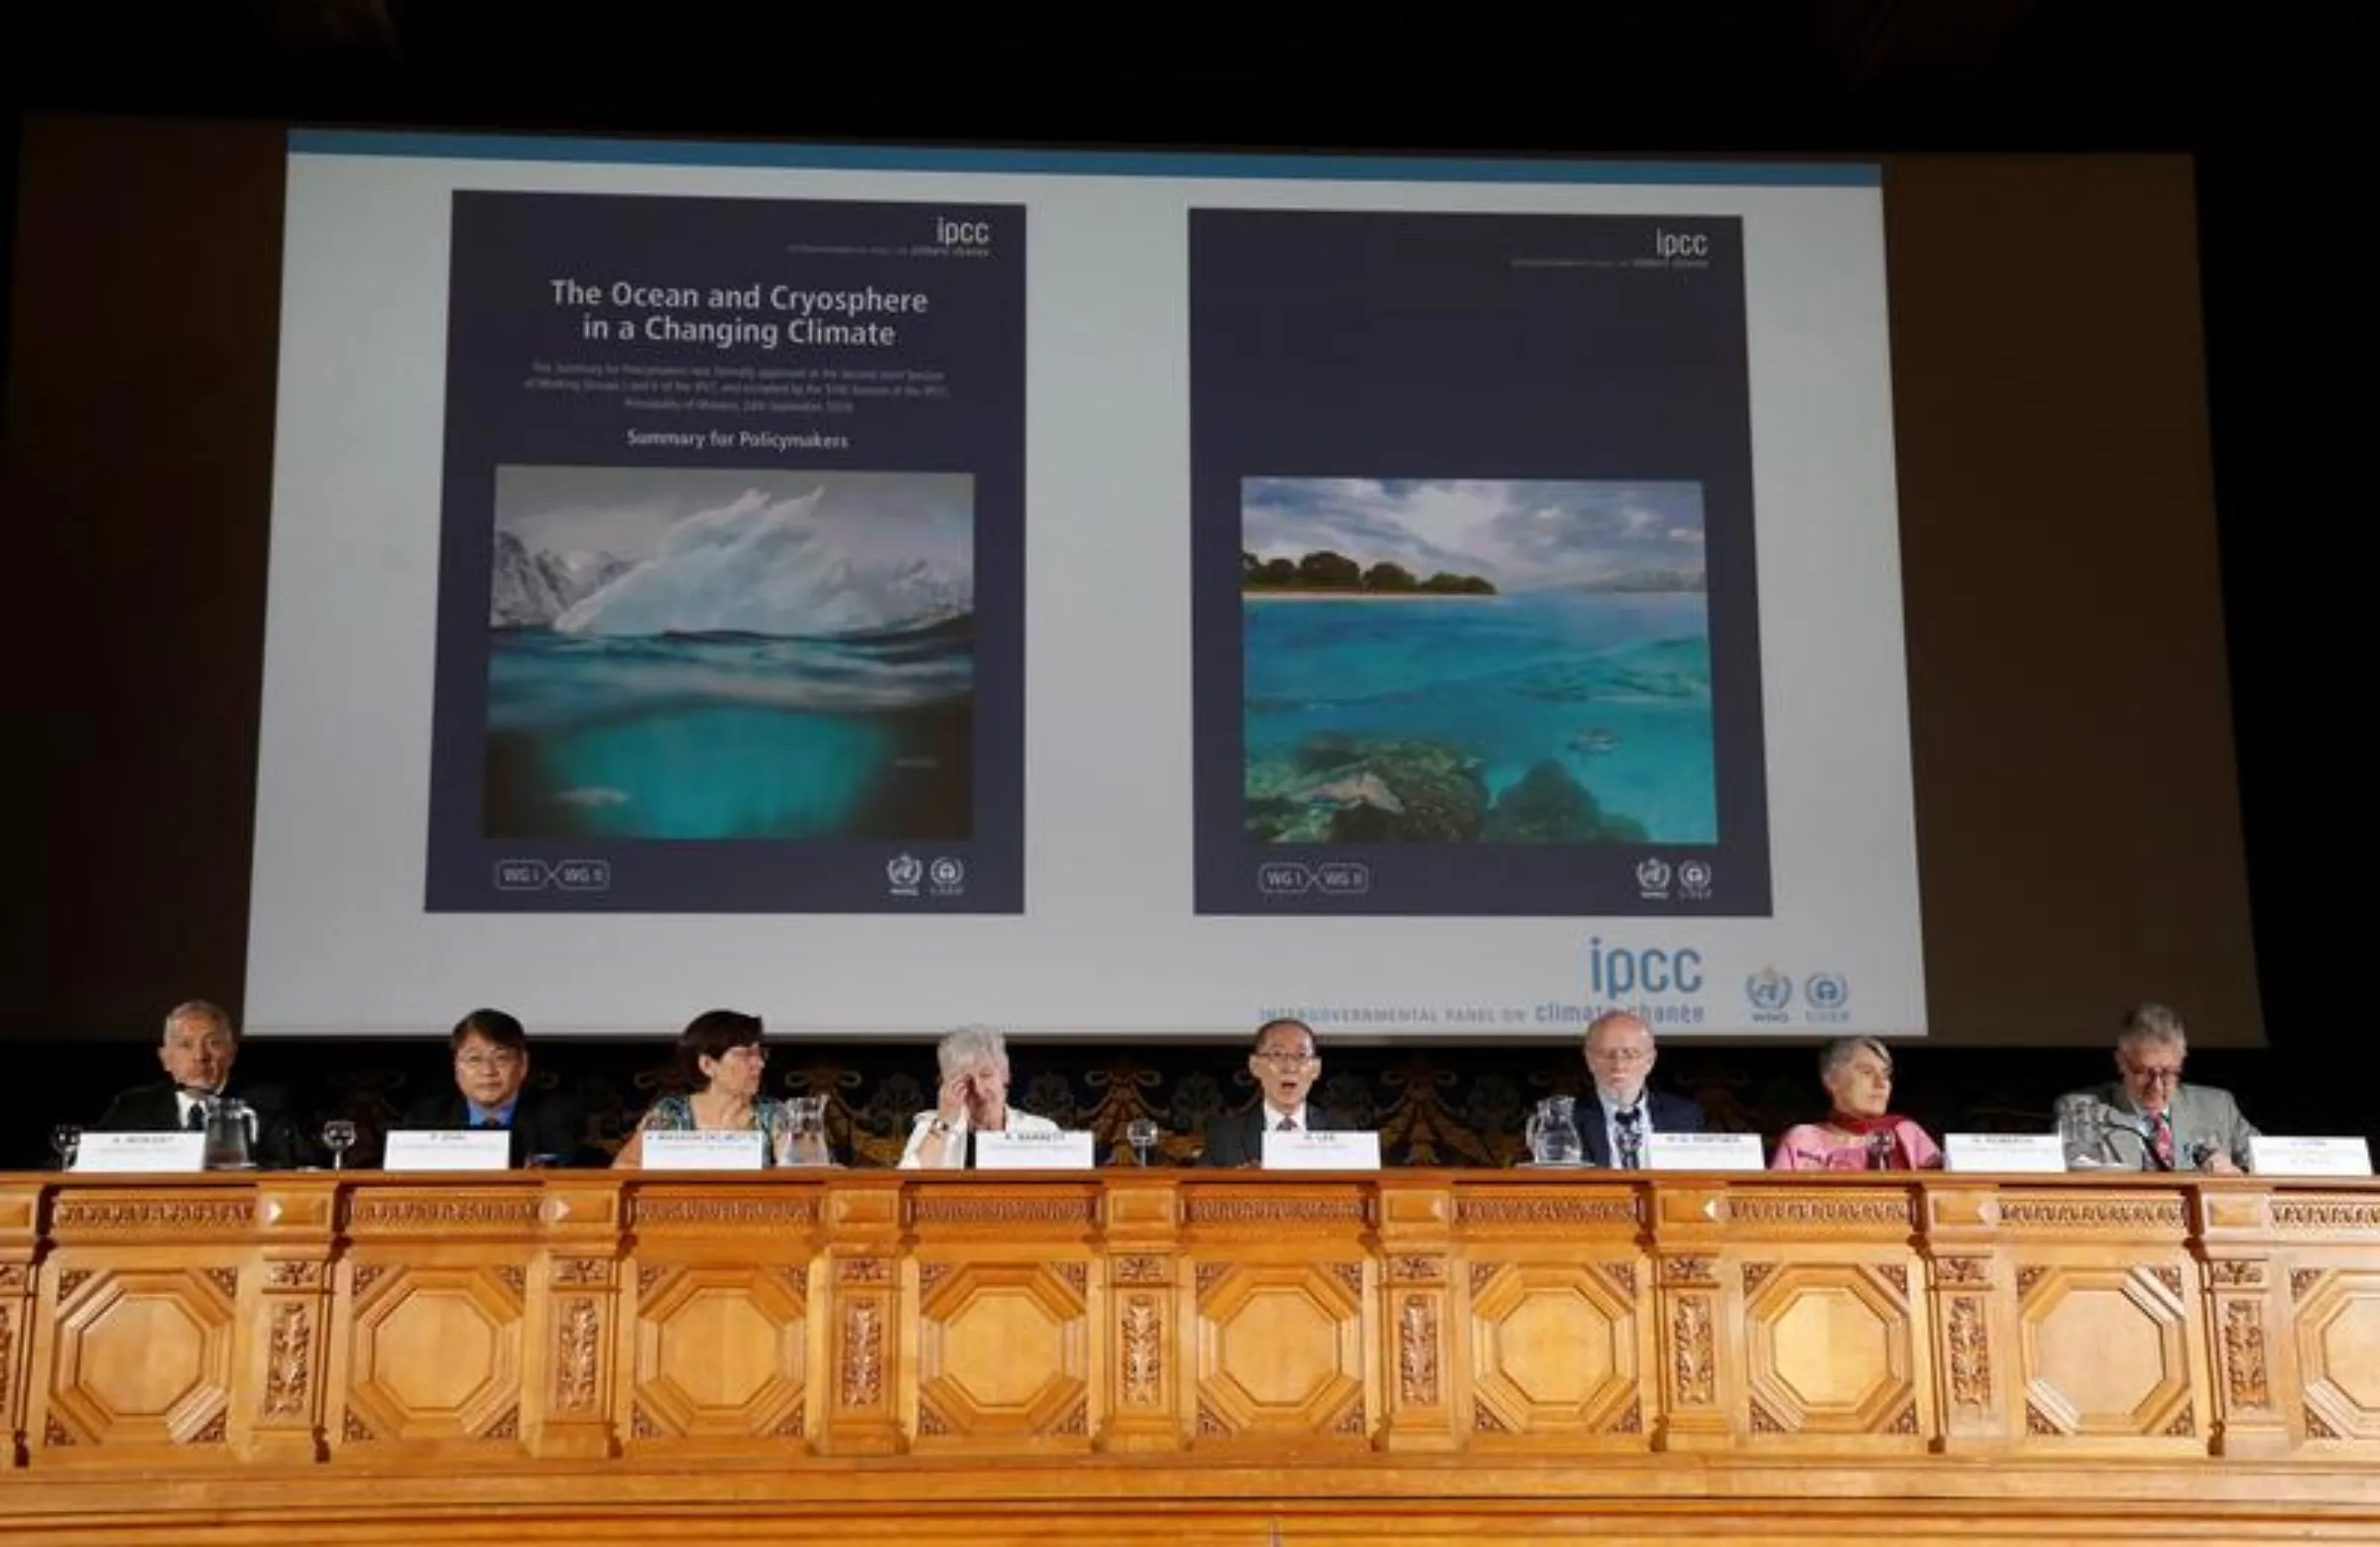 Chair of IPCC Hoesung Lee addresses a news conference as part of the 51st Session of the Intergovernmental Panel on Climate Change (IPCC), in Monaco, September 25, 2019. REUTERS/Eric Gaillard